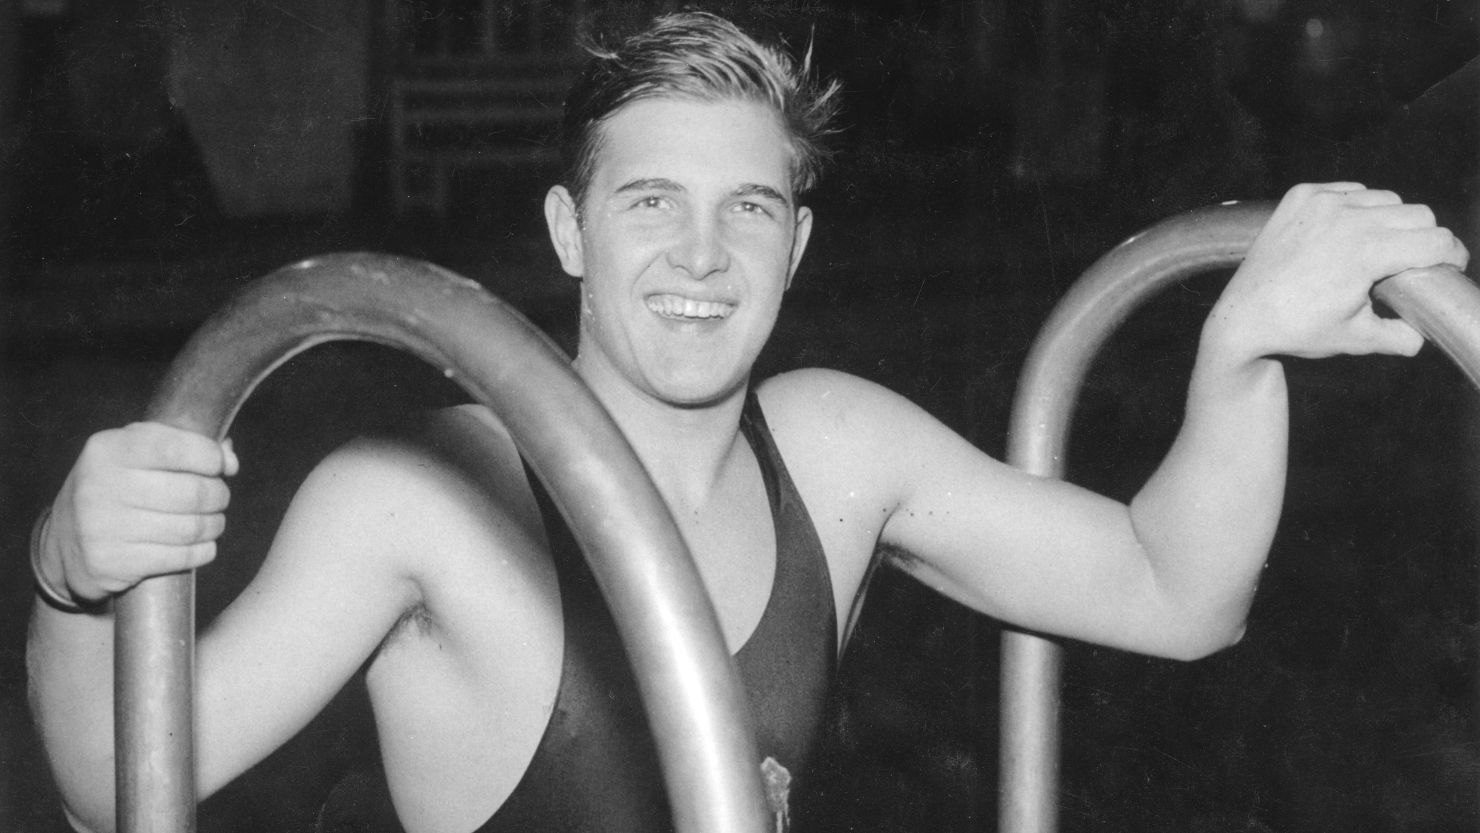 American swimmer Adolph Kiefer at a swimming competition in Vienna, Austria, on November 6, 1935.